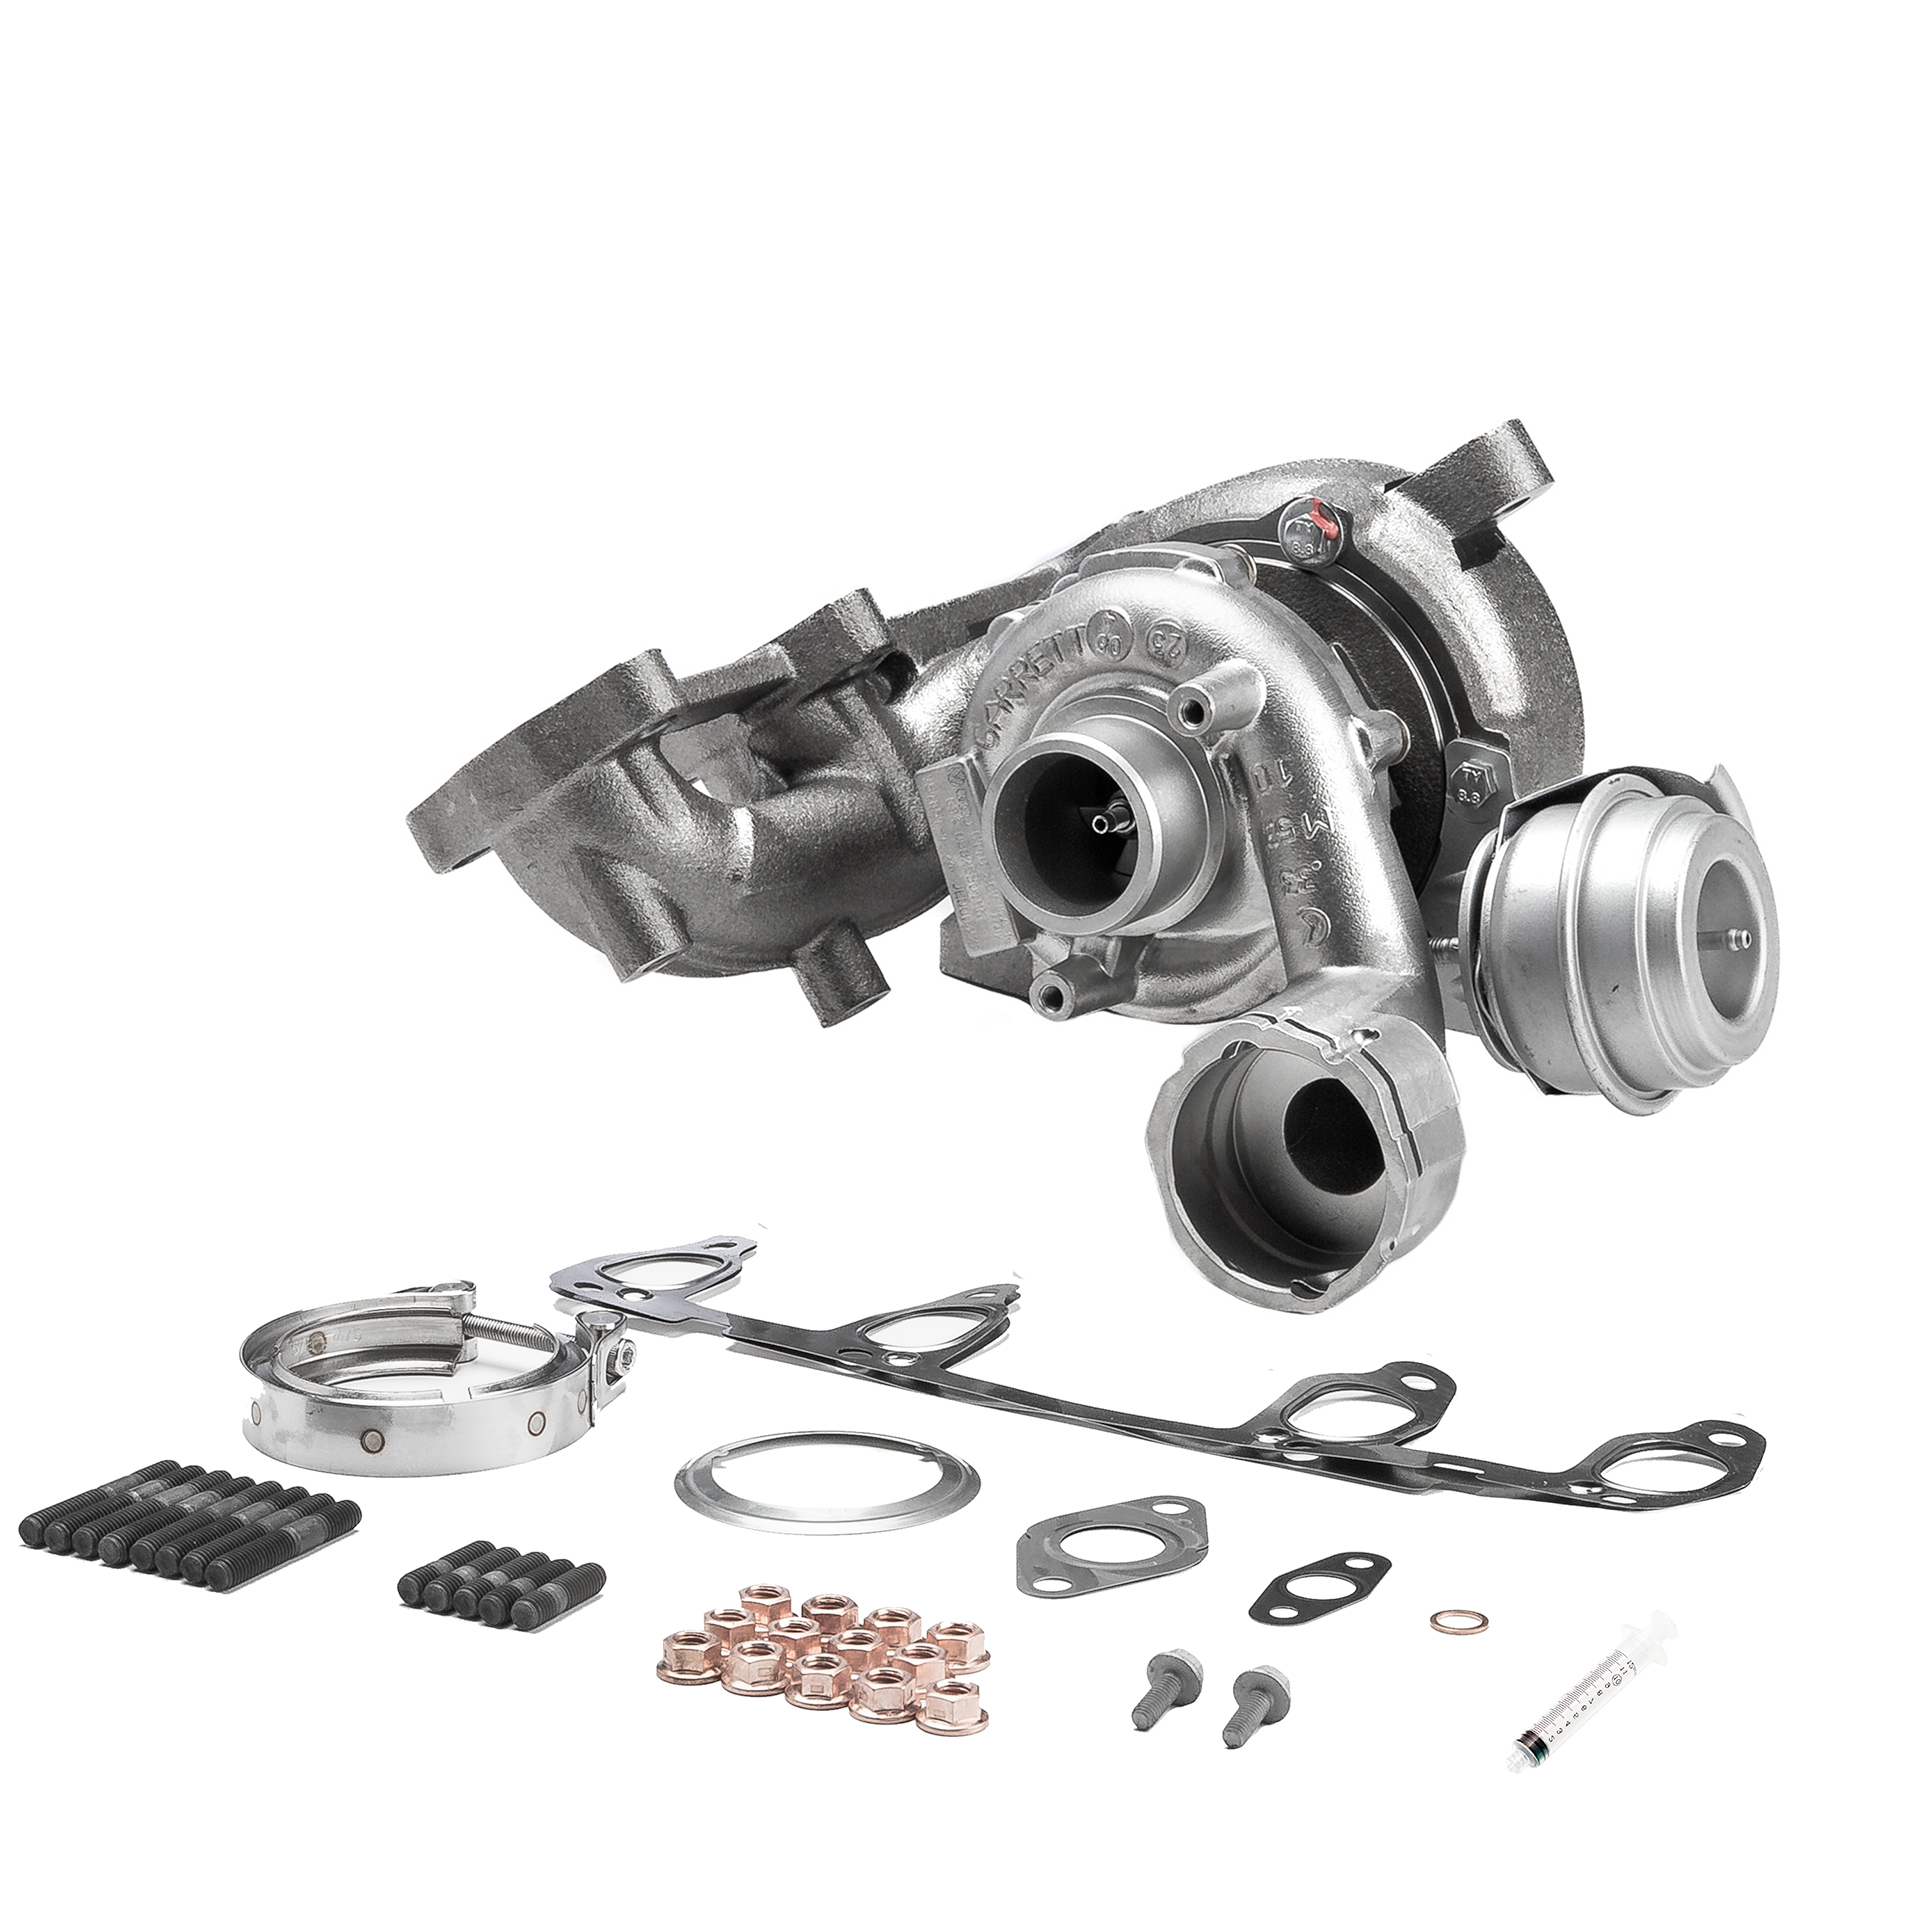 BR Turbo Turbo, with attachment material Turbo 751851-5001RSM buy